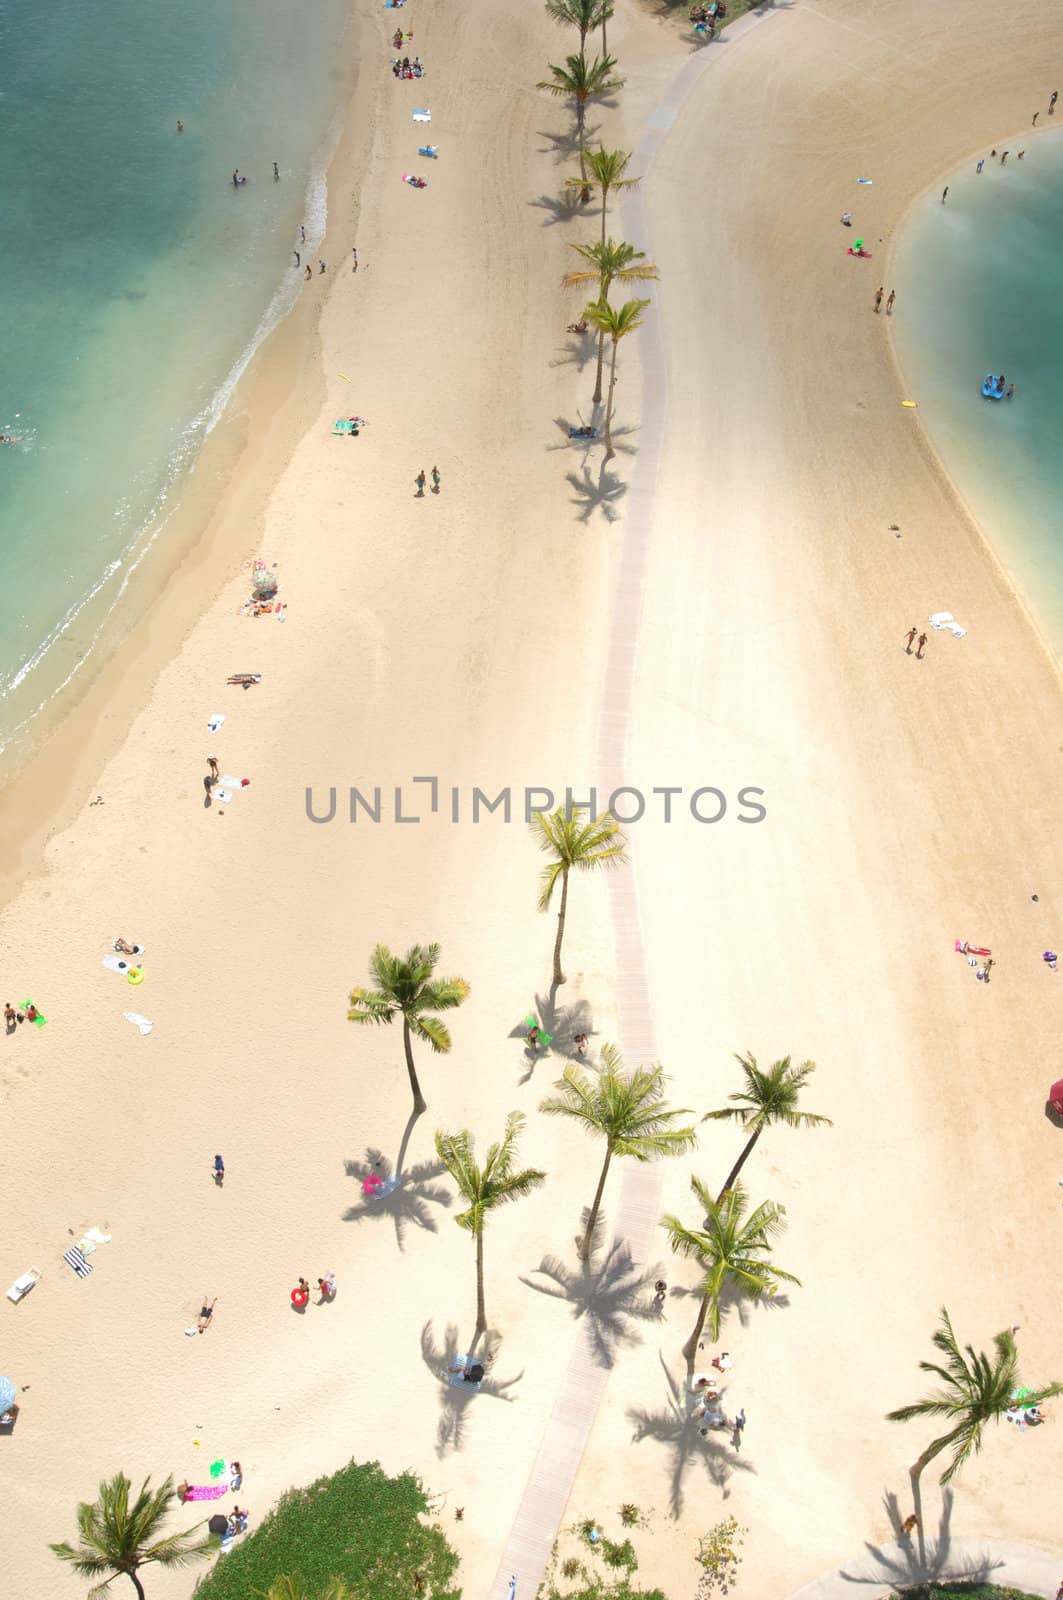 Looking down at Hawaii's Waikiki Beach in Honolulu where bathers enjoy the sand and surf litterd with palm trees.